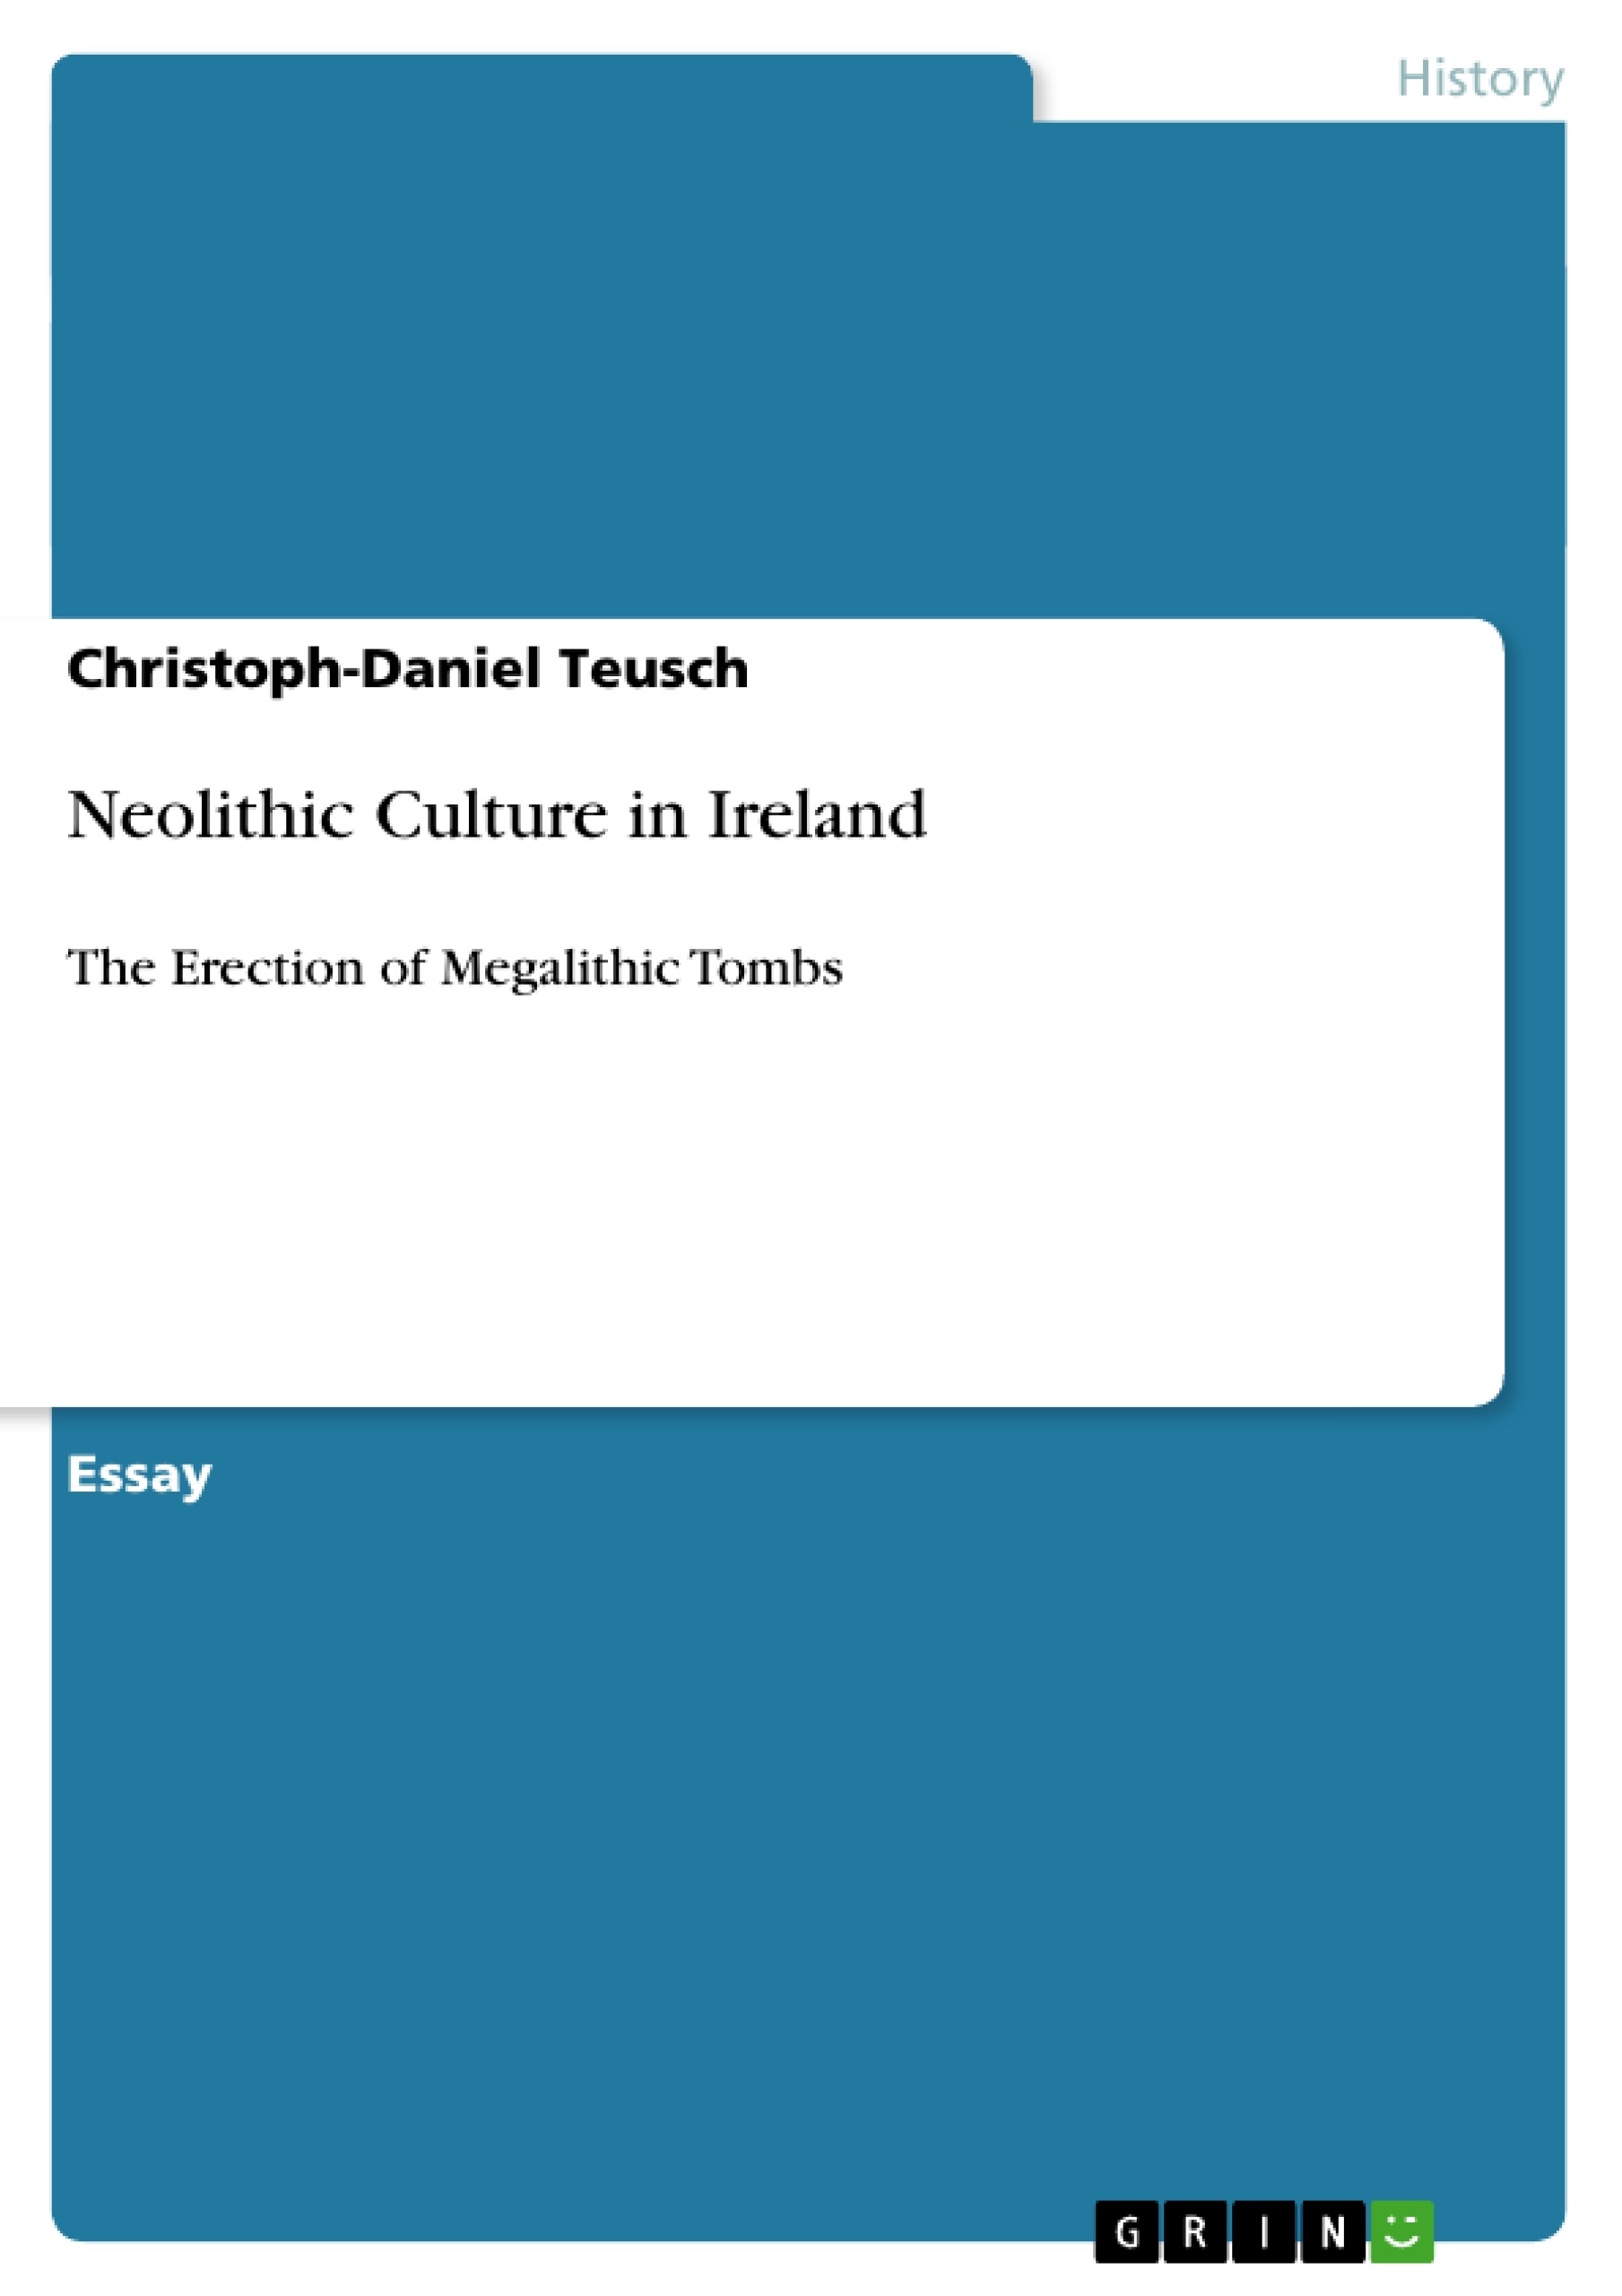 Titre: Neolithic Culture in Ireland 